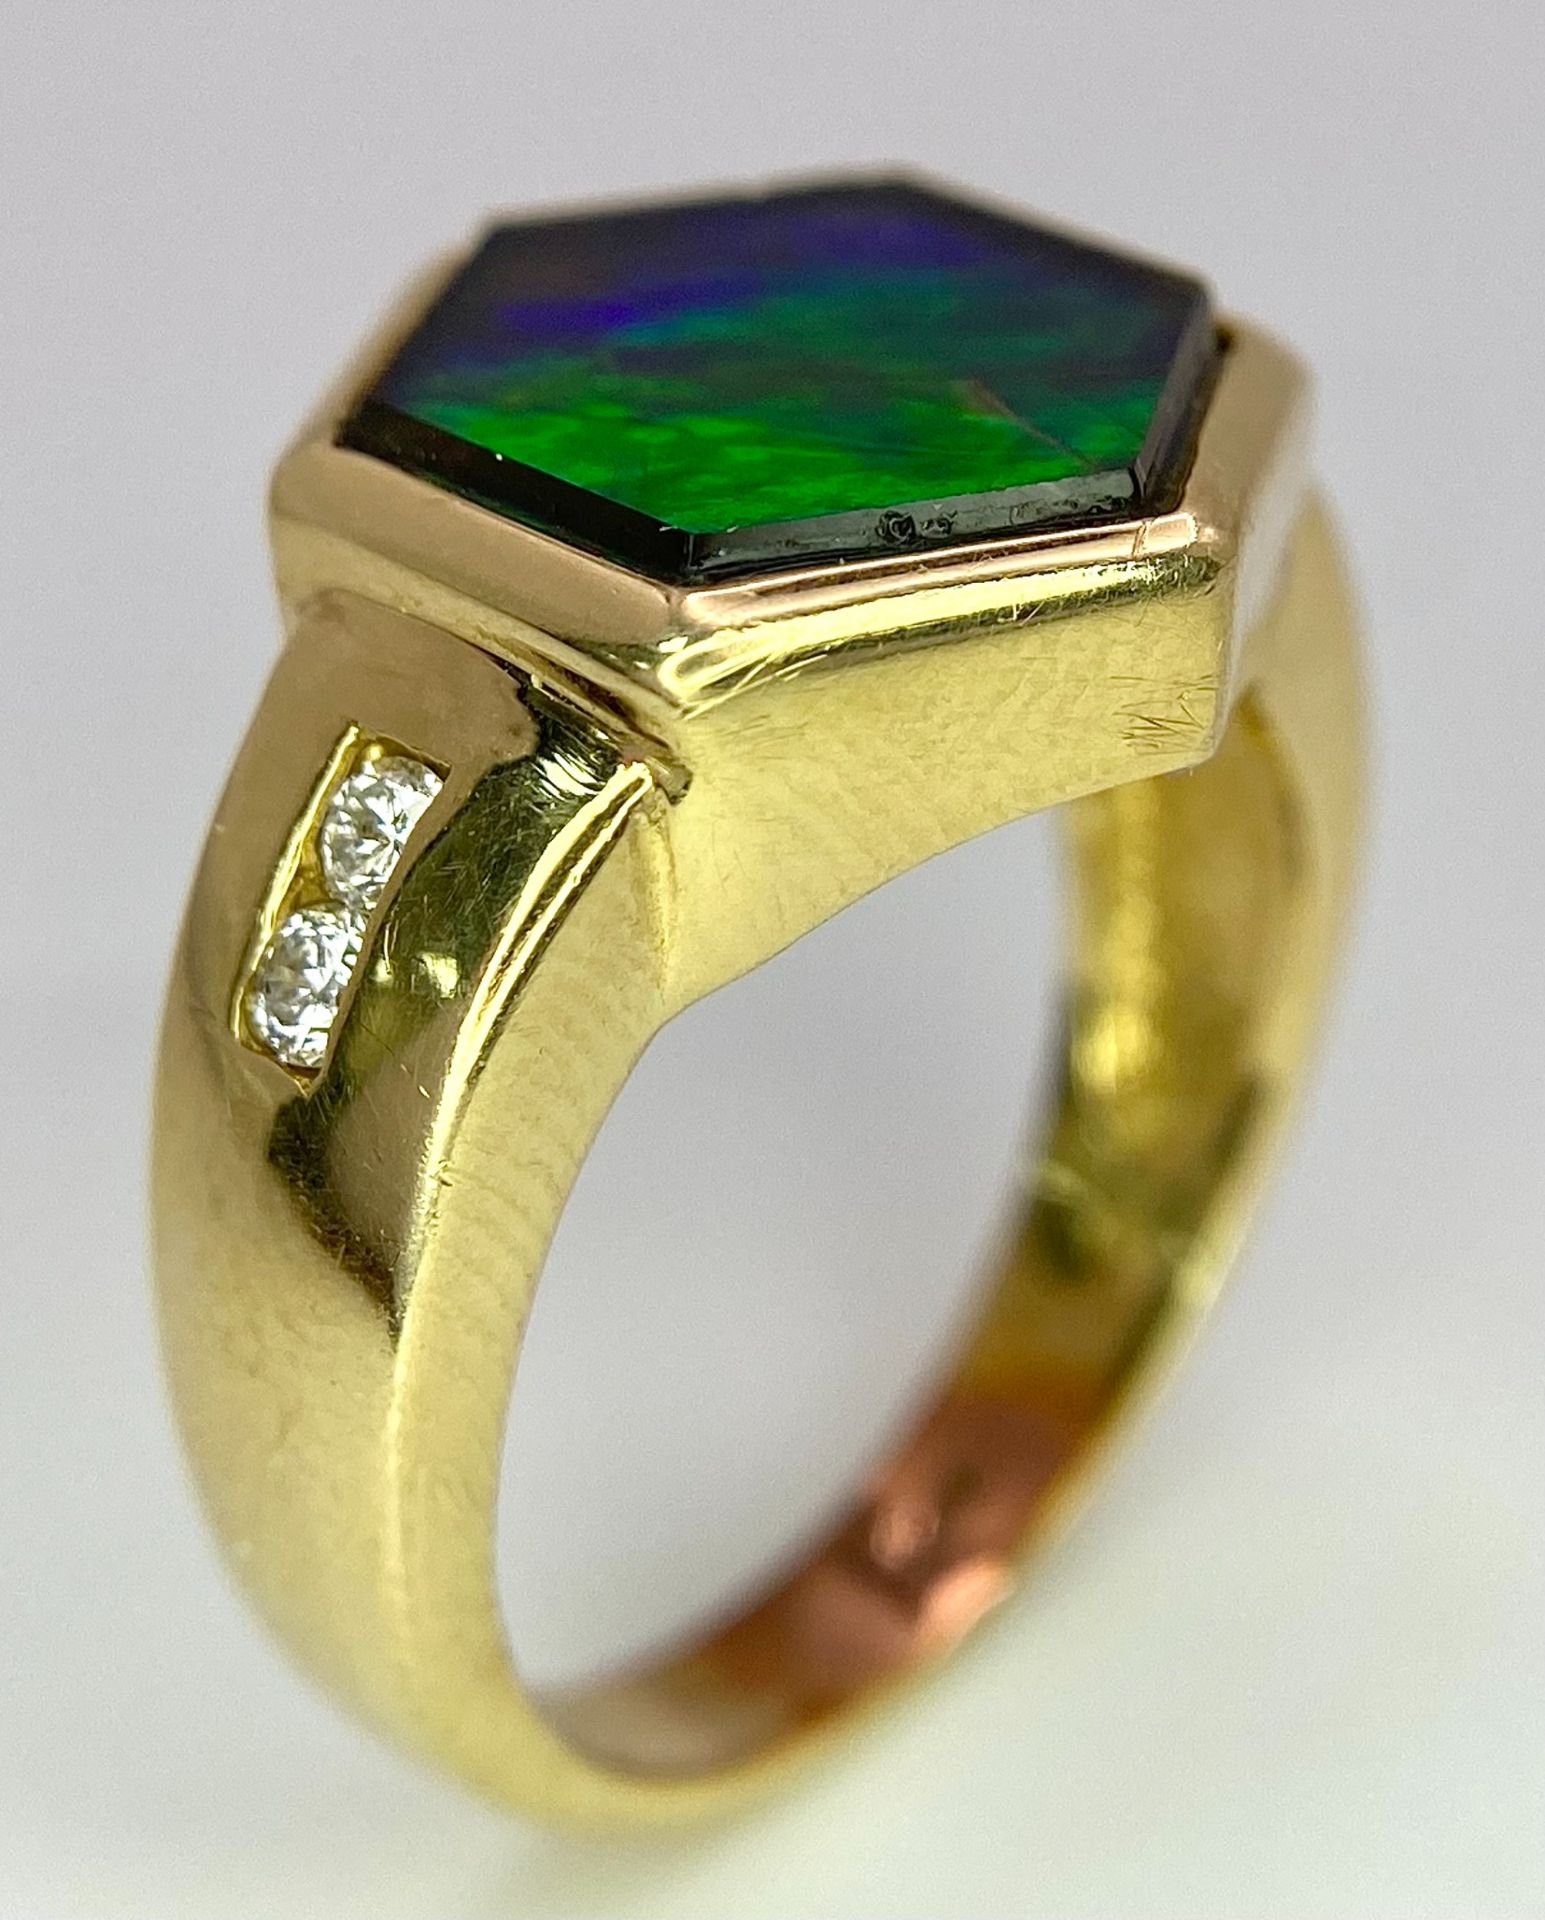 A Very Different, 14K Gold, Ammolite and Diamond Ring. Hexagonal shape. Size L. 6.3g total weight. - Image 2 of 9